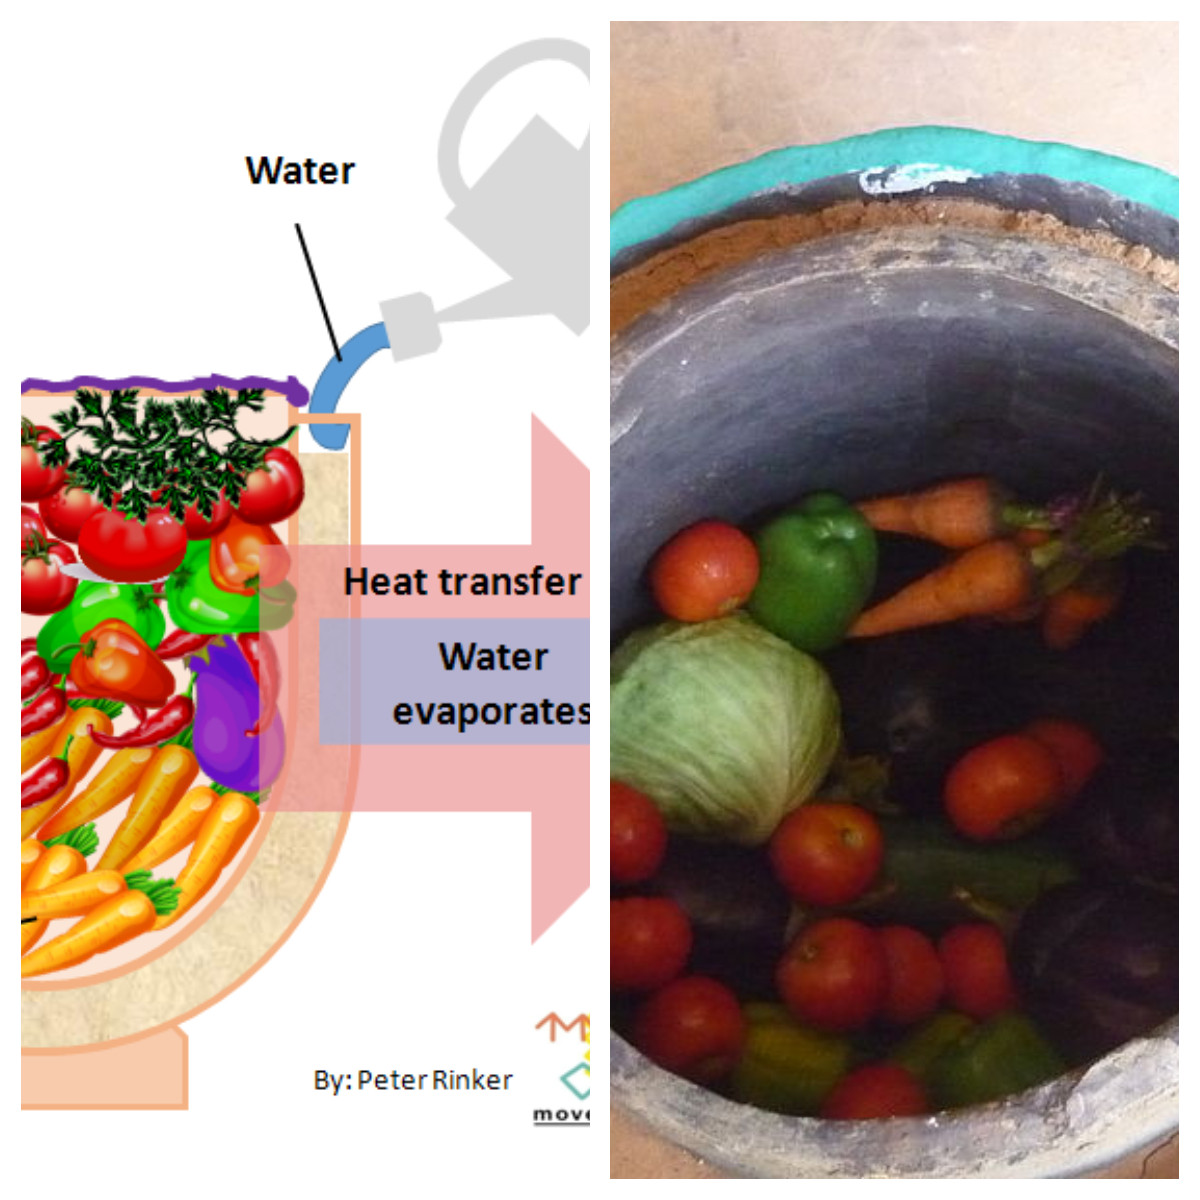 Keeping Food Cool with Evaporative Cooling. Peter Rinker - CC BY-SA 3.0